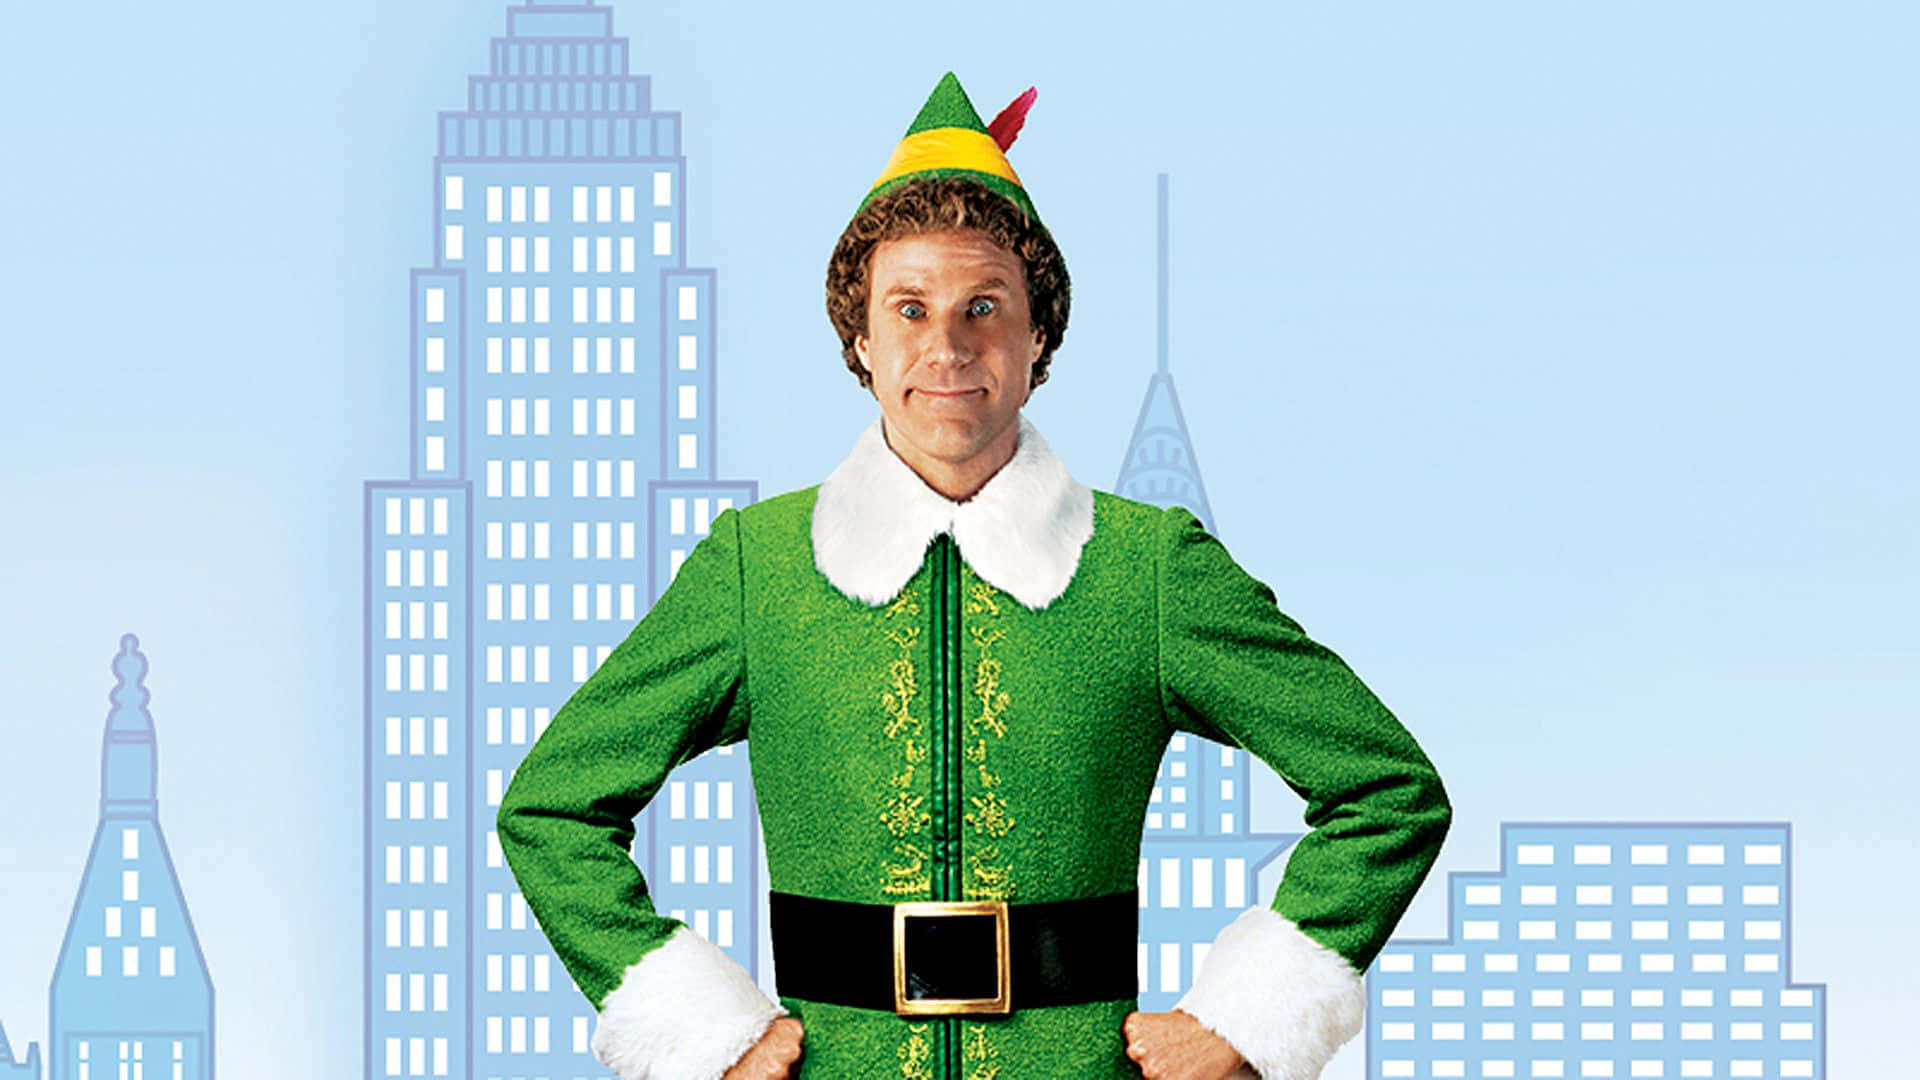 A Man Dressed As An Elf In Front Of A City